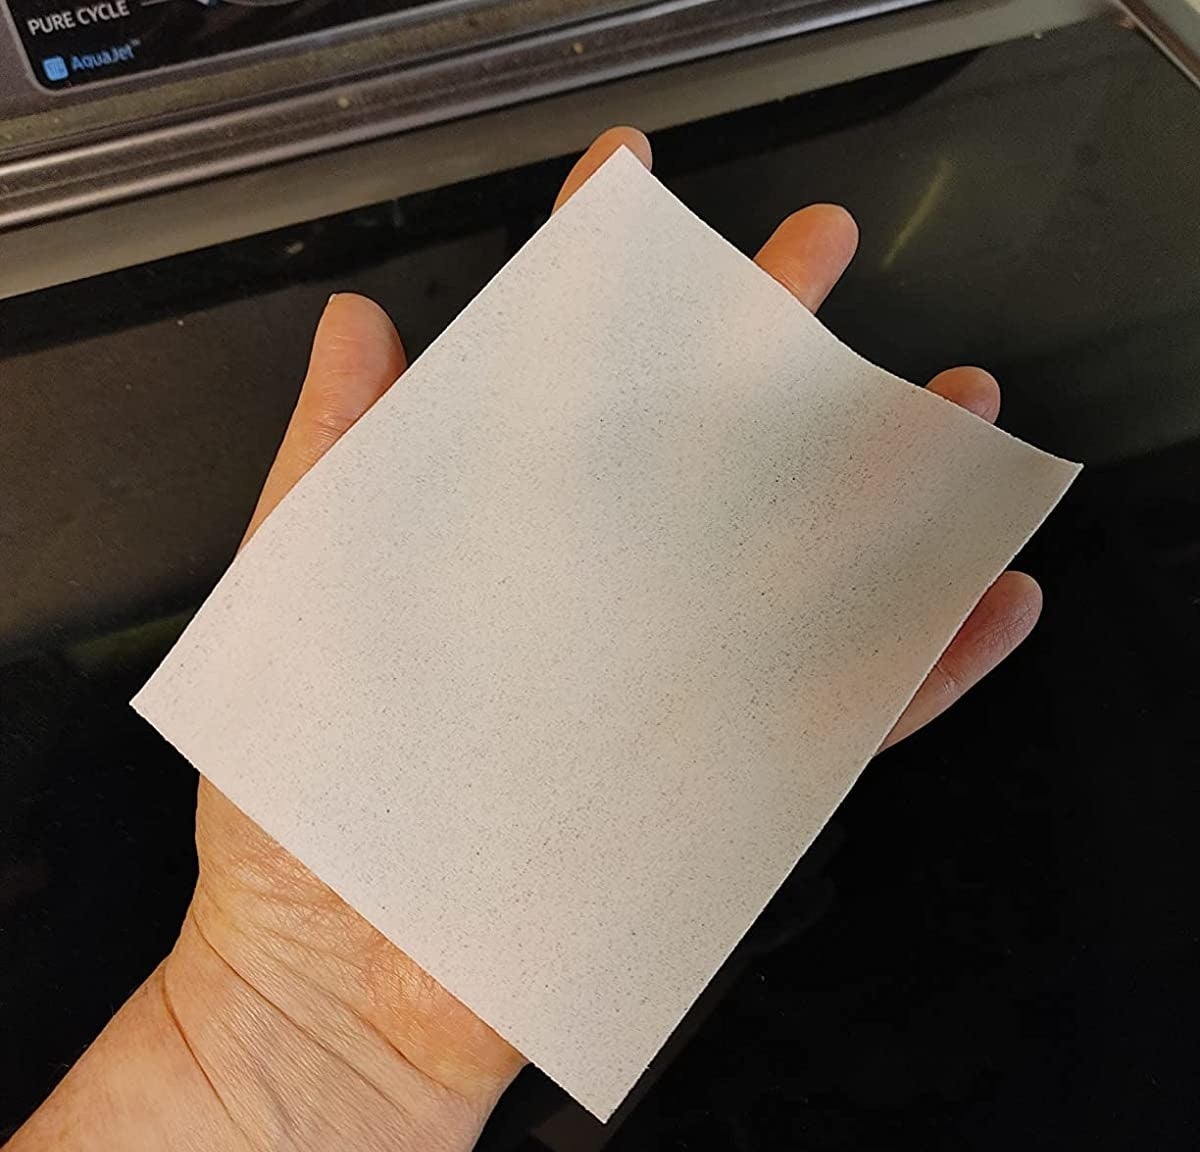 Reviewer&#x27;s photo of a hand holding one of the detergent sheets